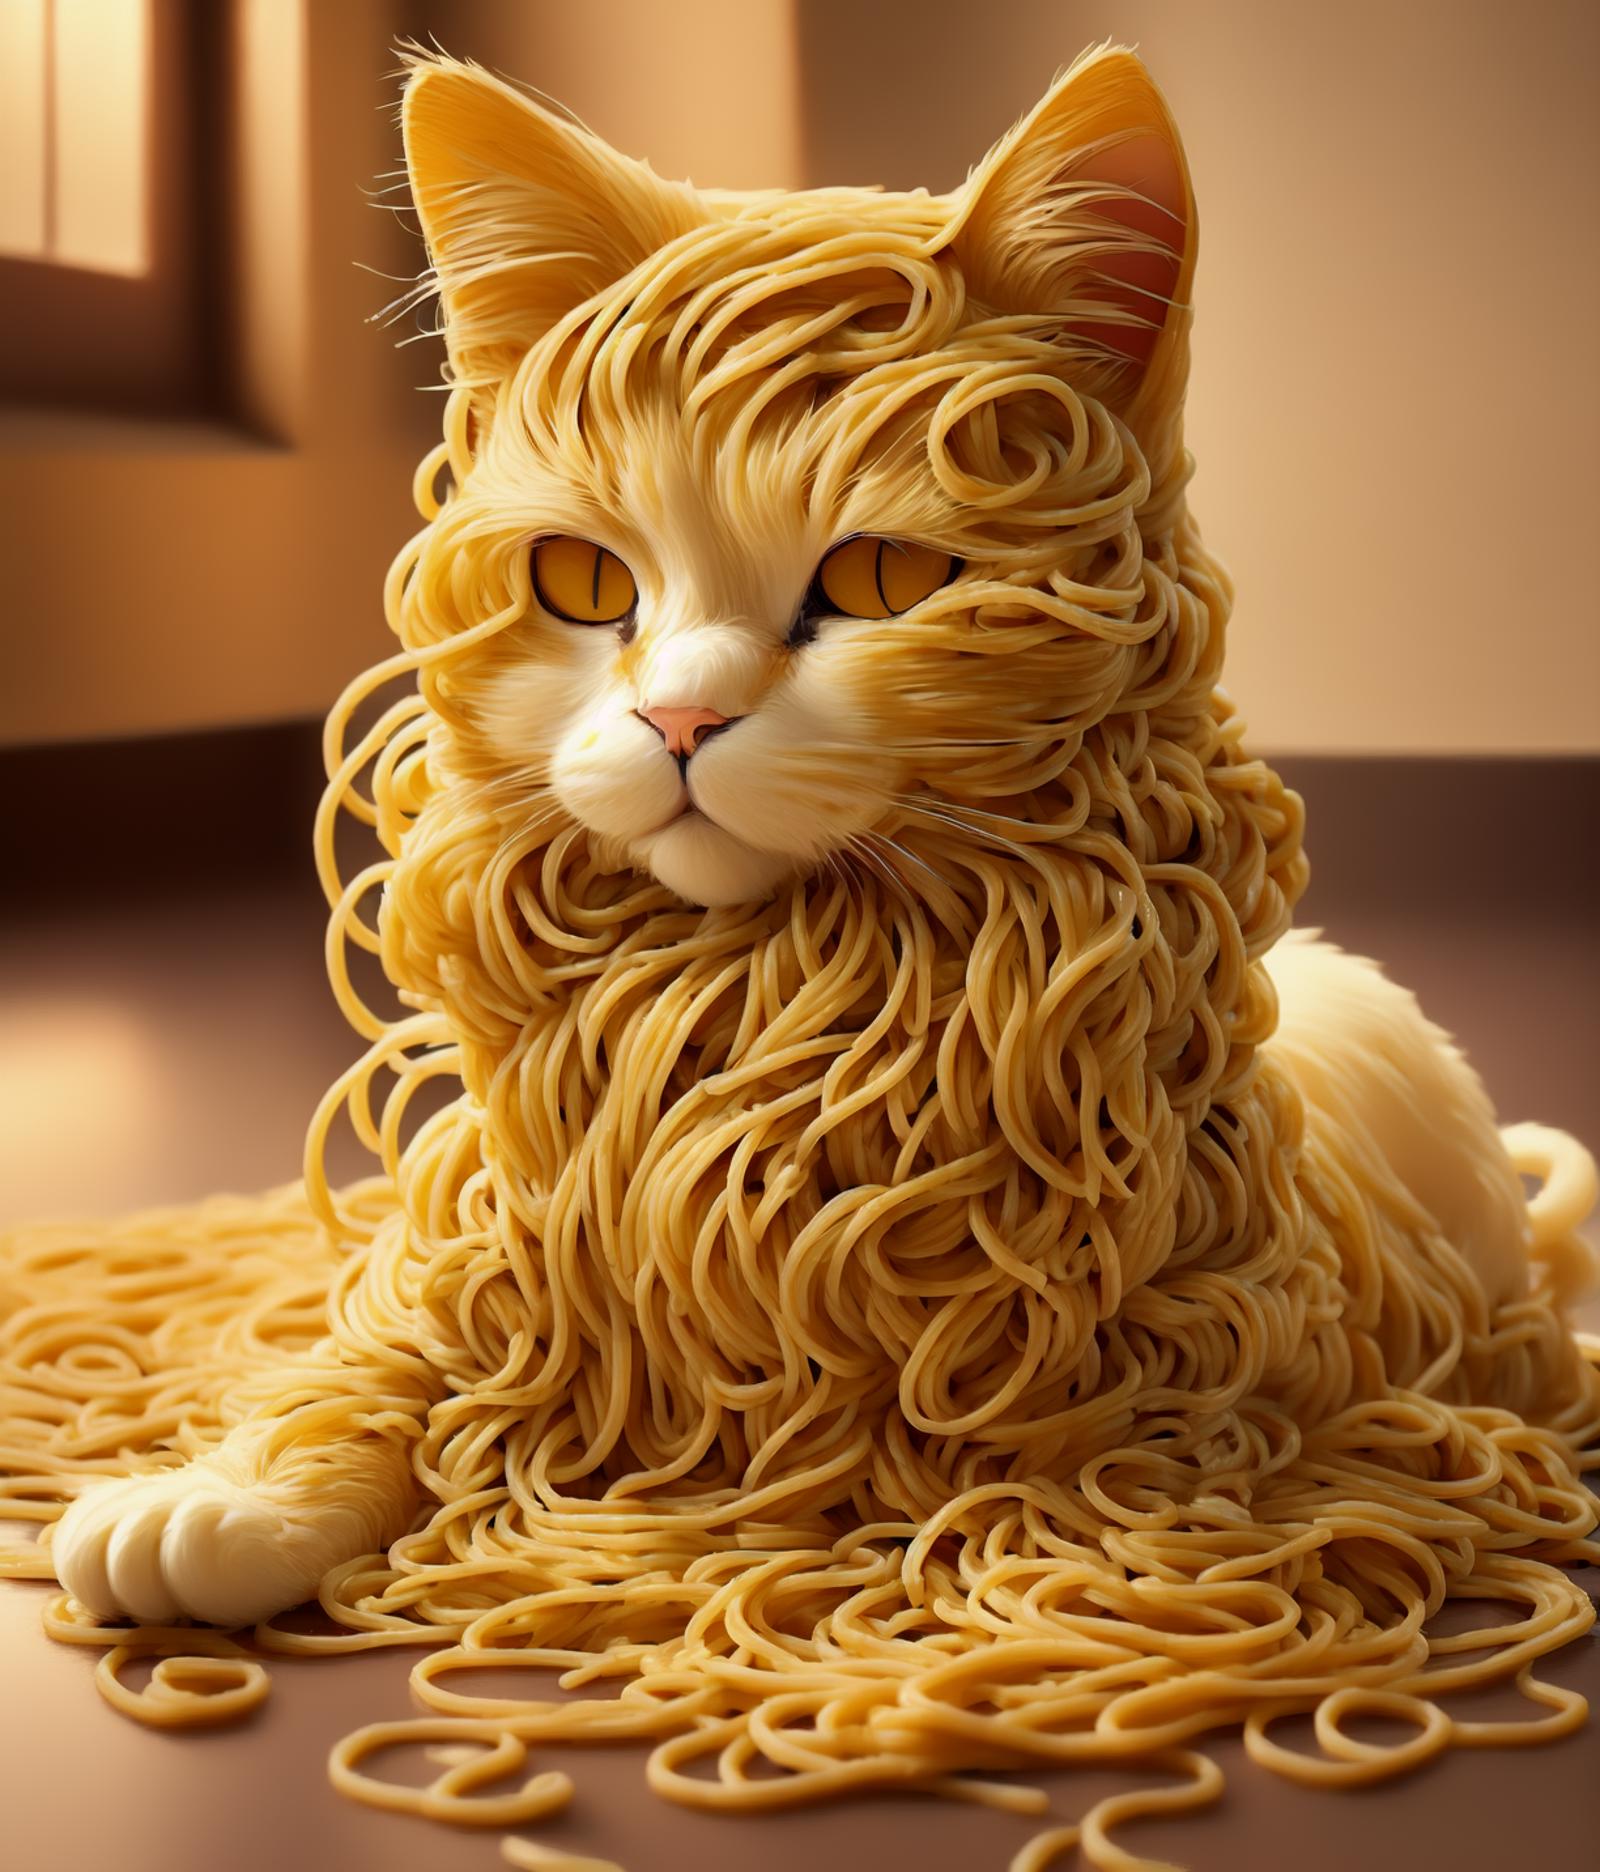 A computer generated image of a cat with spaghetti on its head.